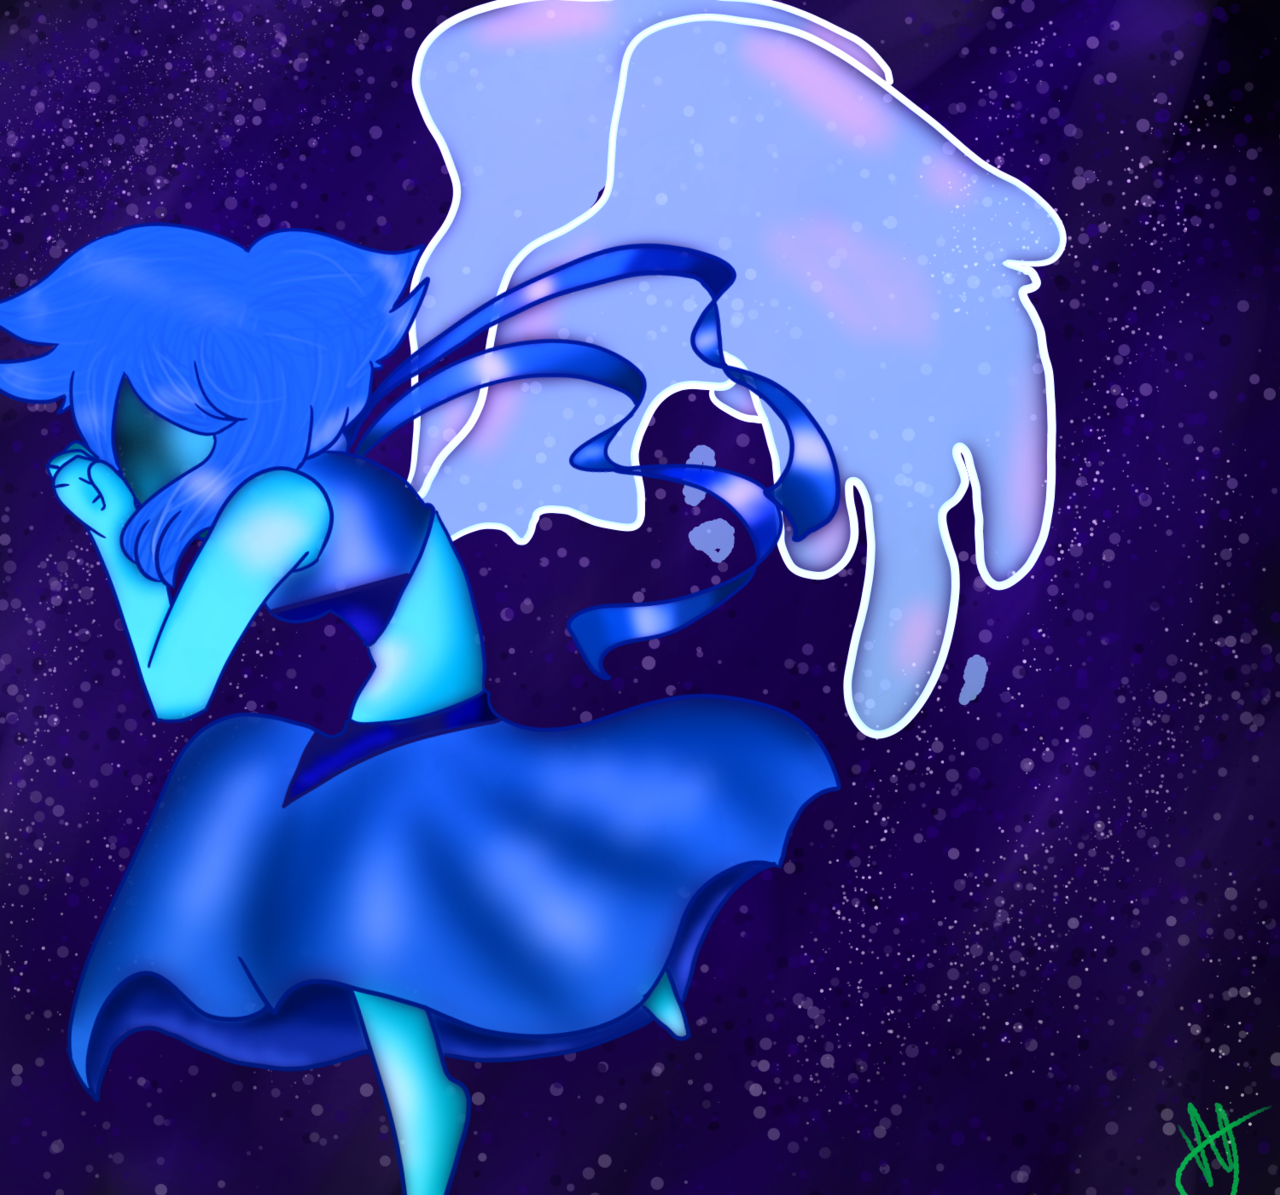 Lapis in space, regretting her decision…